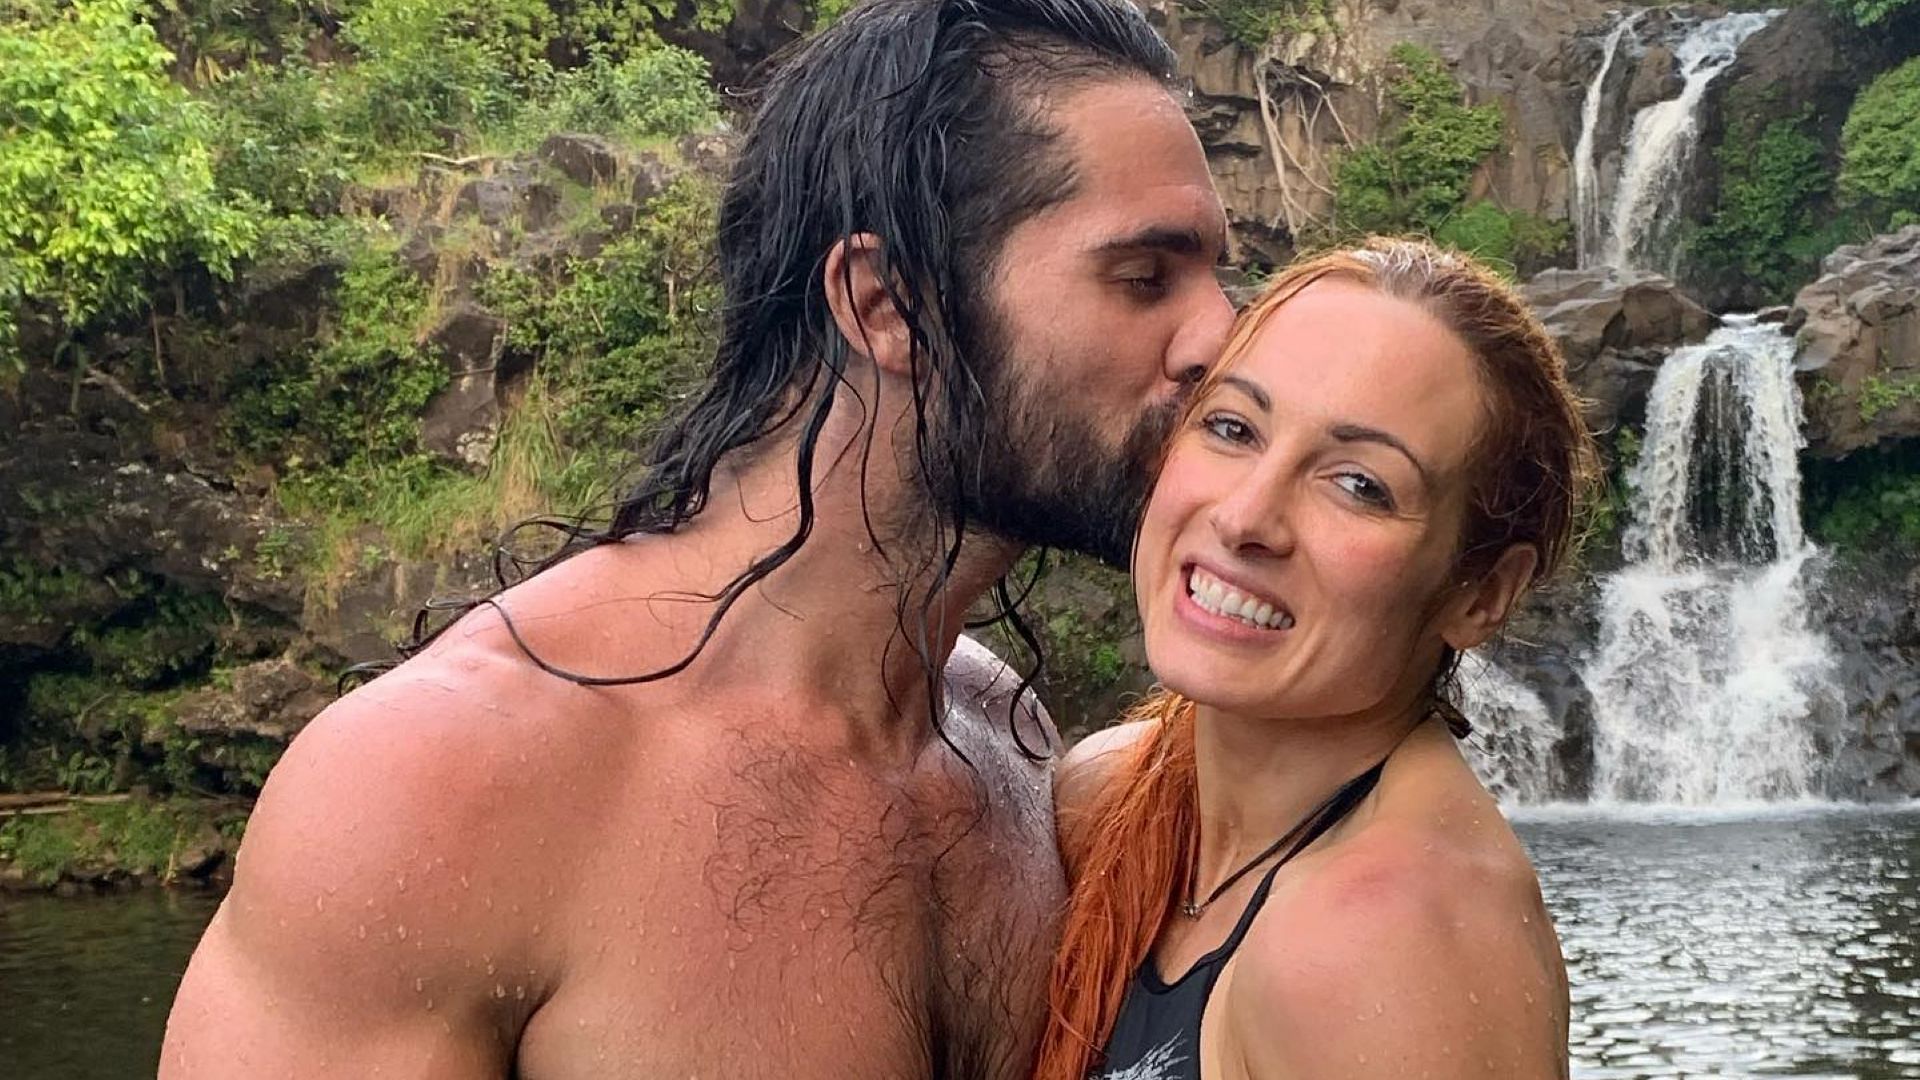 WWE Superstars Seth Rollins and Becky Lynch share a moment on vacation